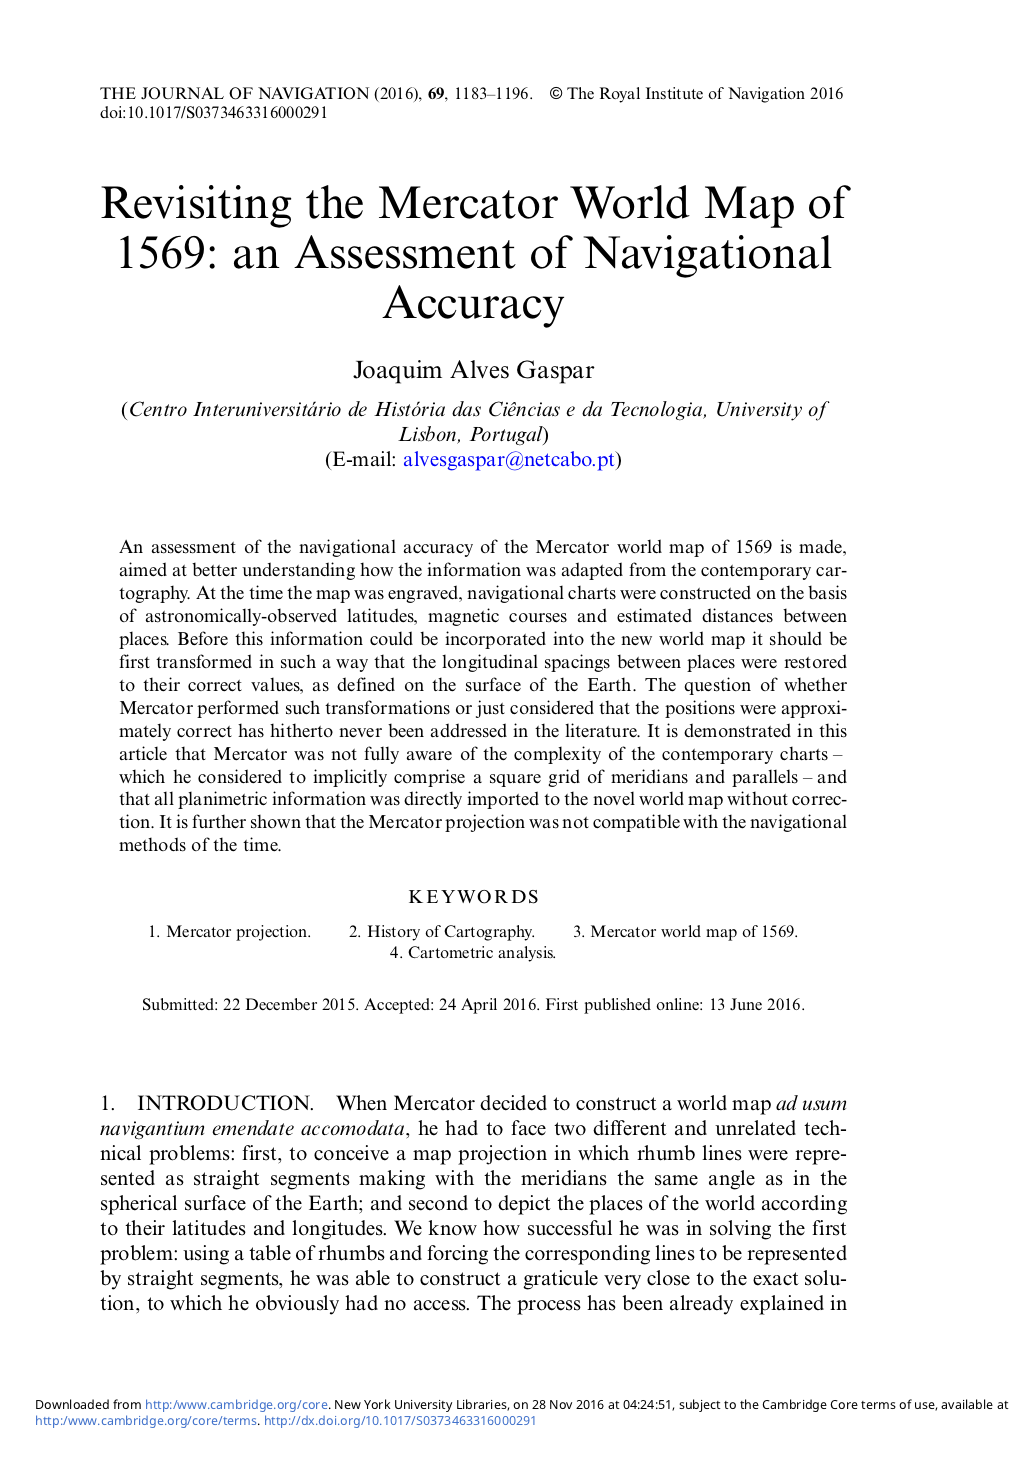 Revisiting the Mercator World Map of 1569: an Assessment of Navigational Accuracy, Capa